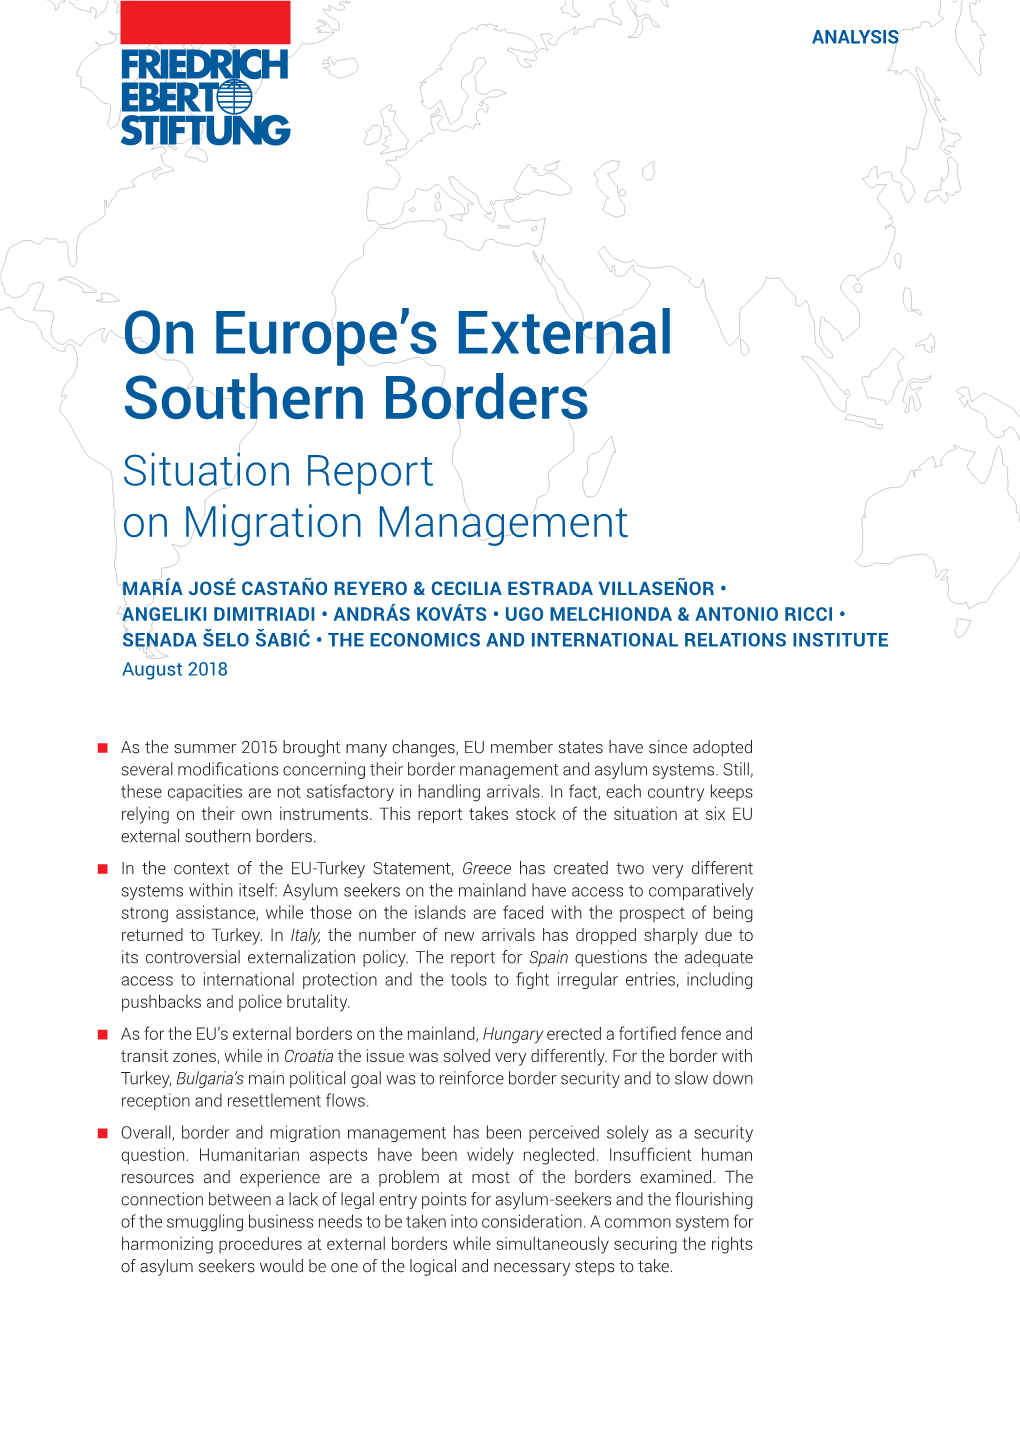 On Europe's External Southern Borders: Situation Report On